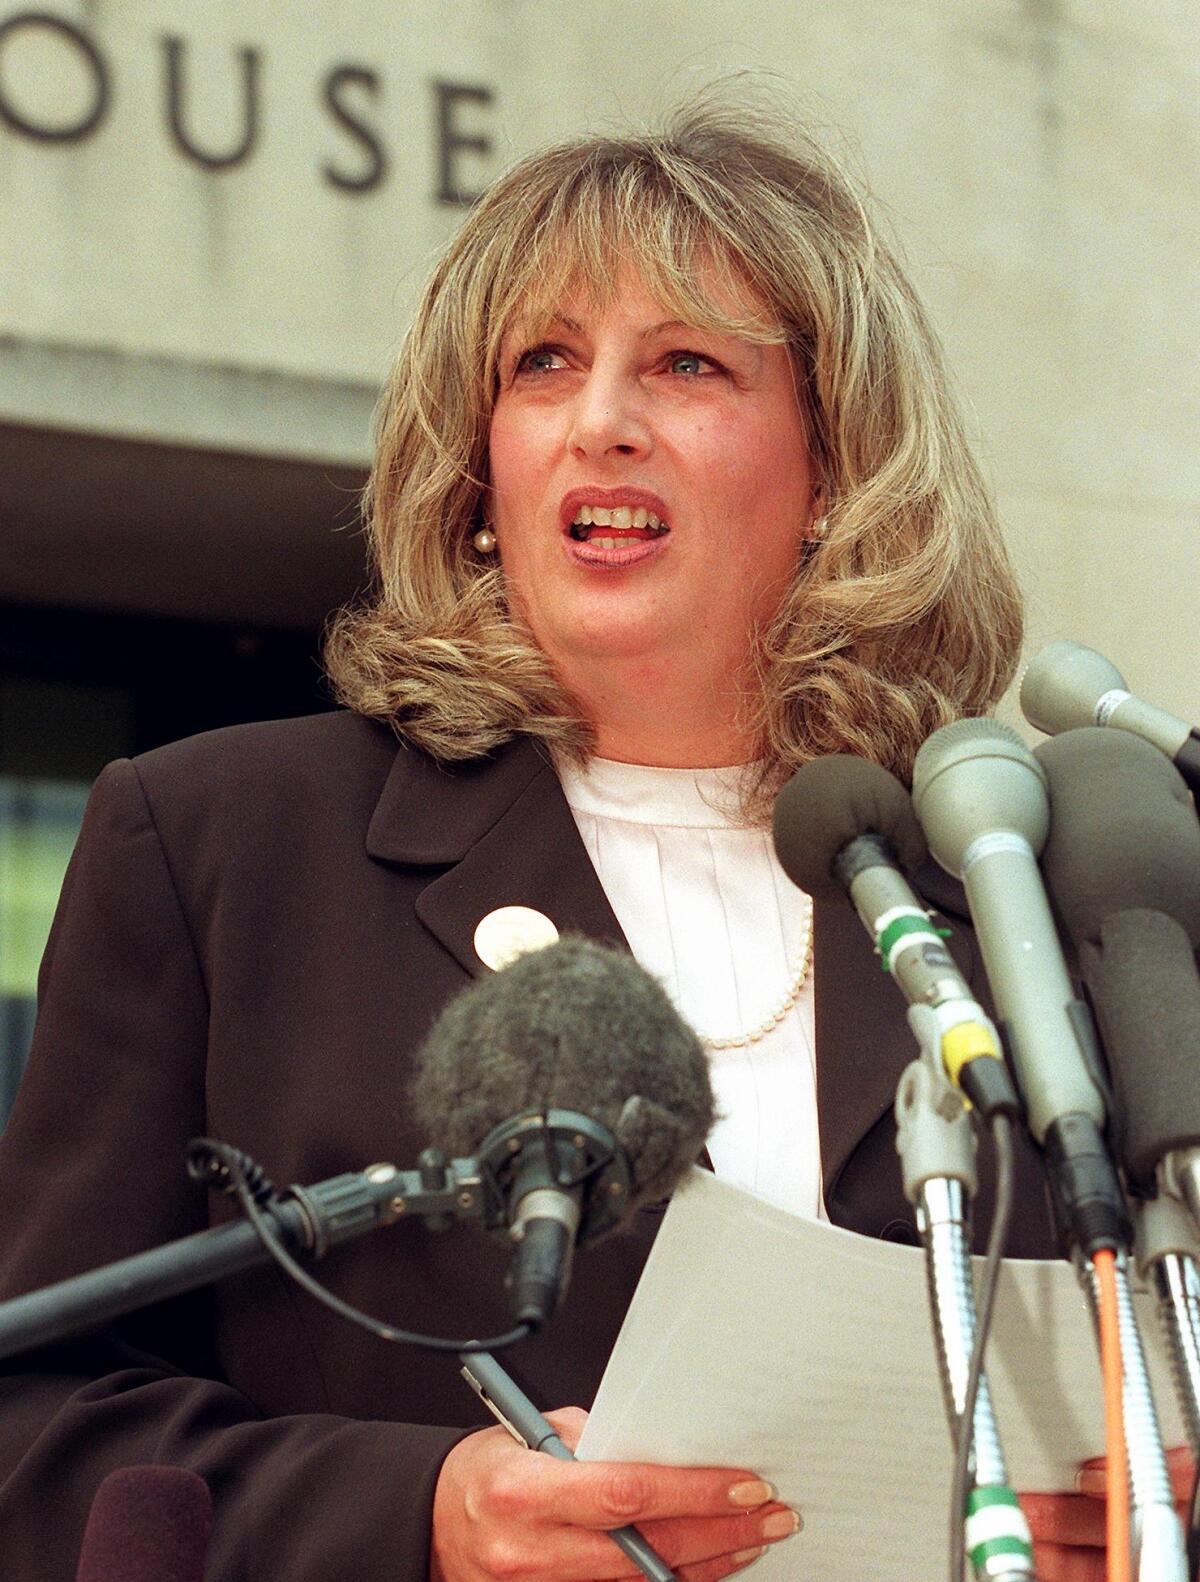 Linda Tripp delivers remarks at a press conference